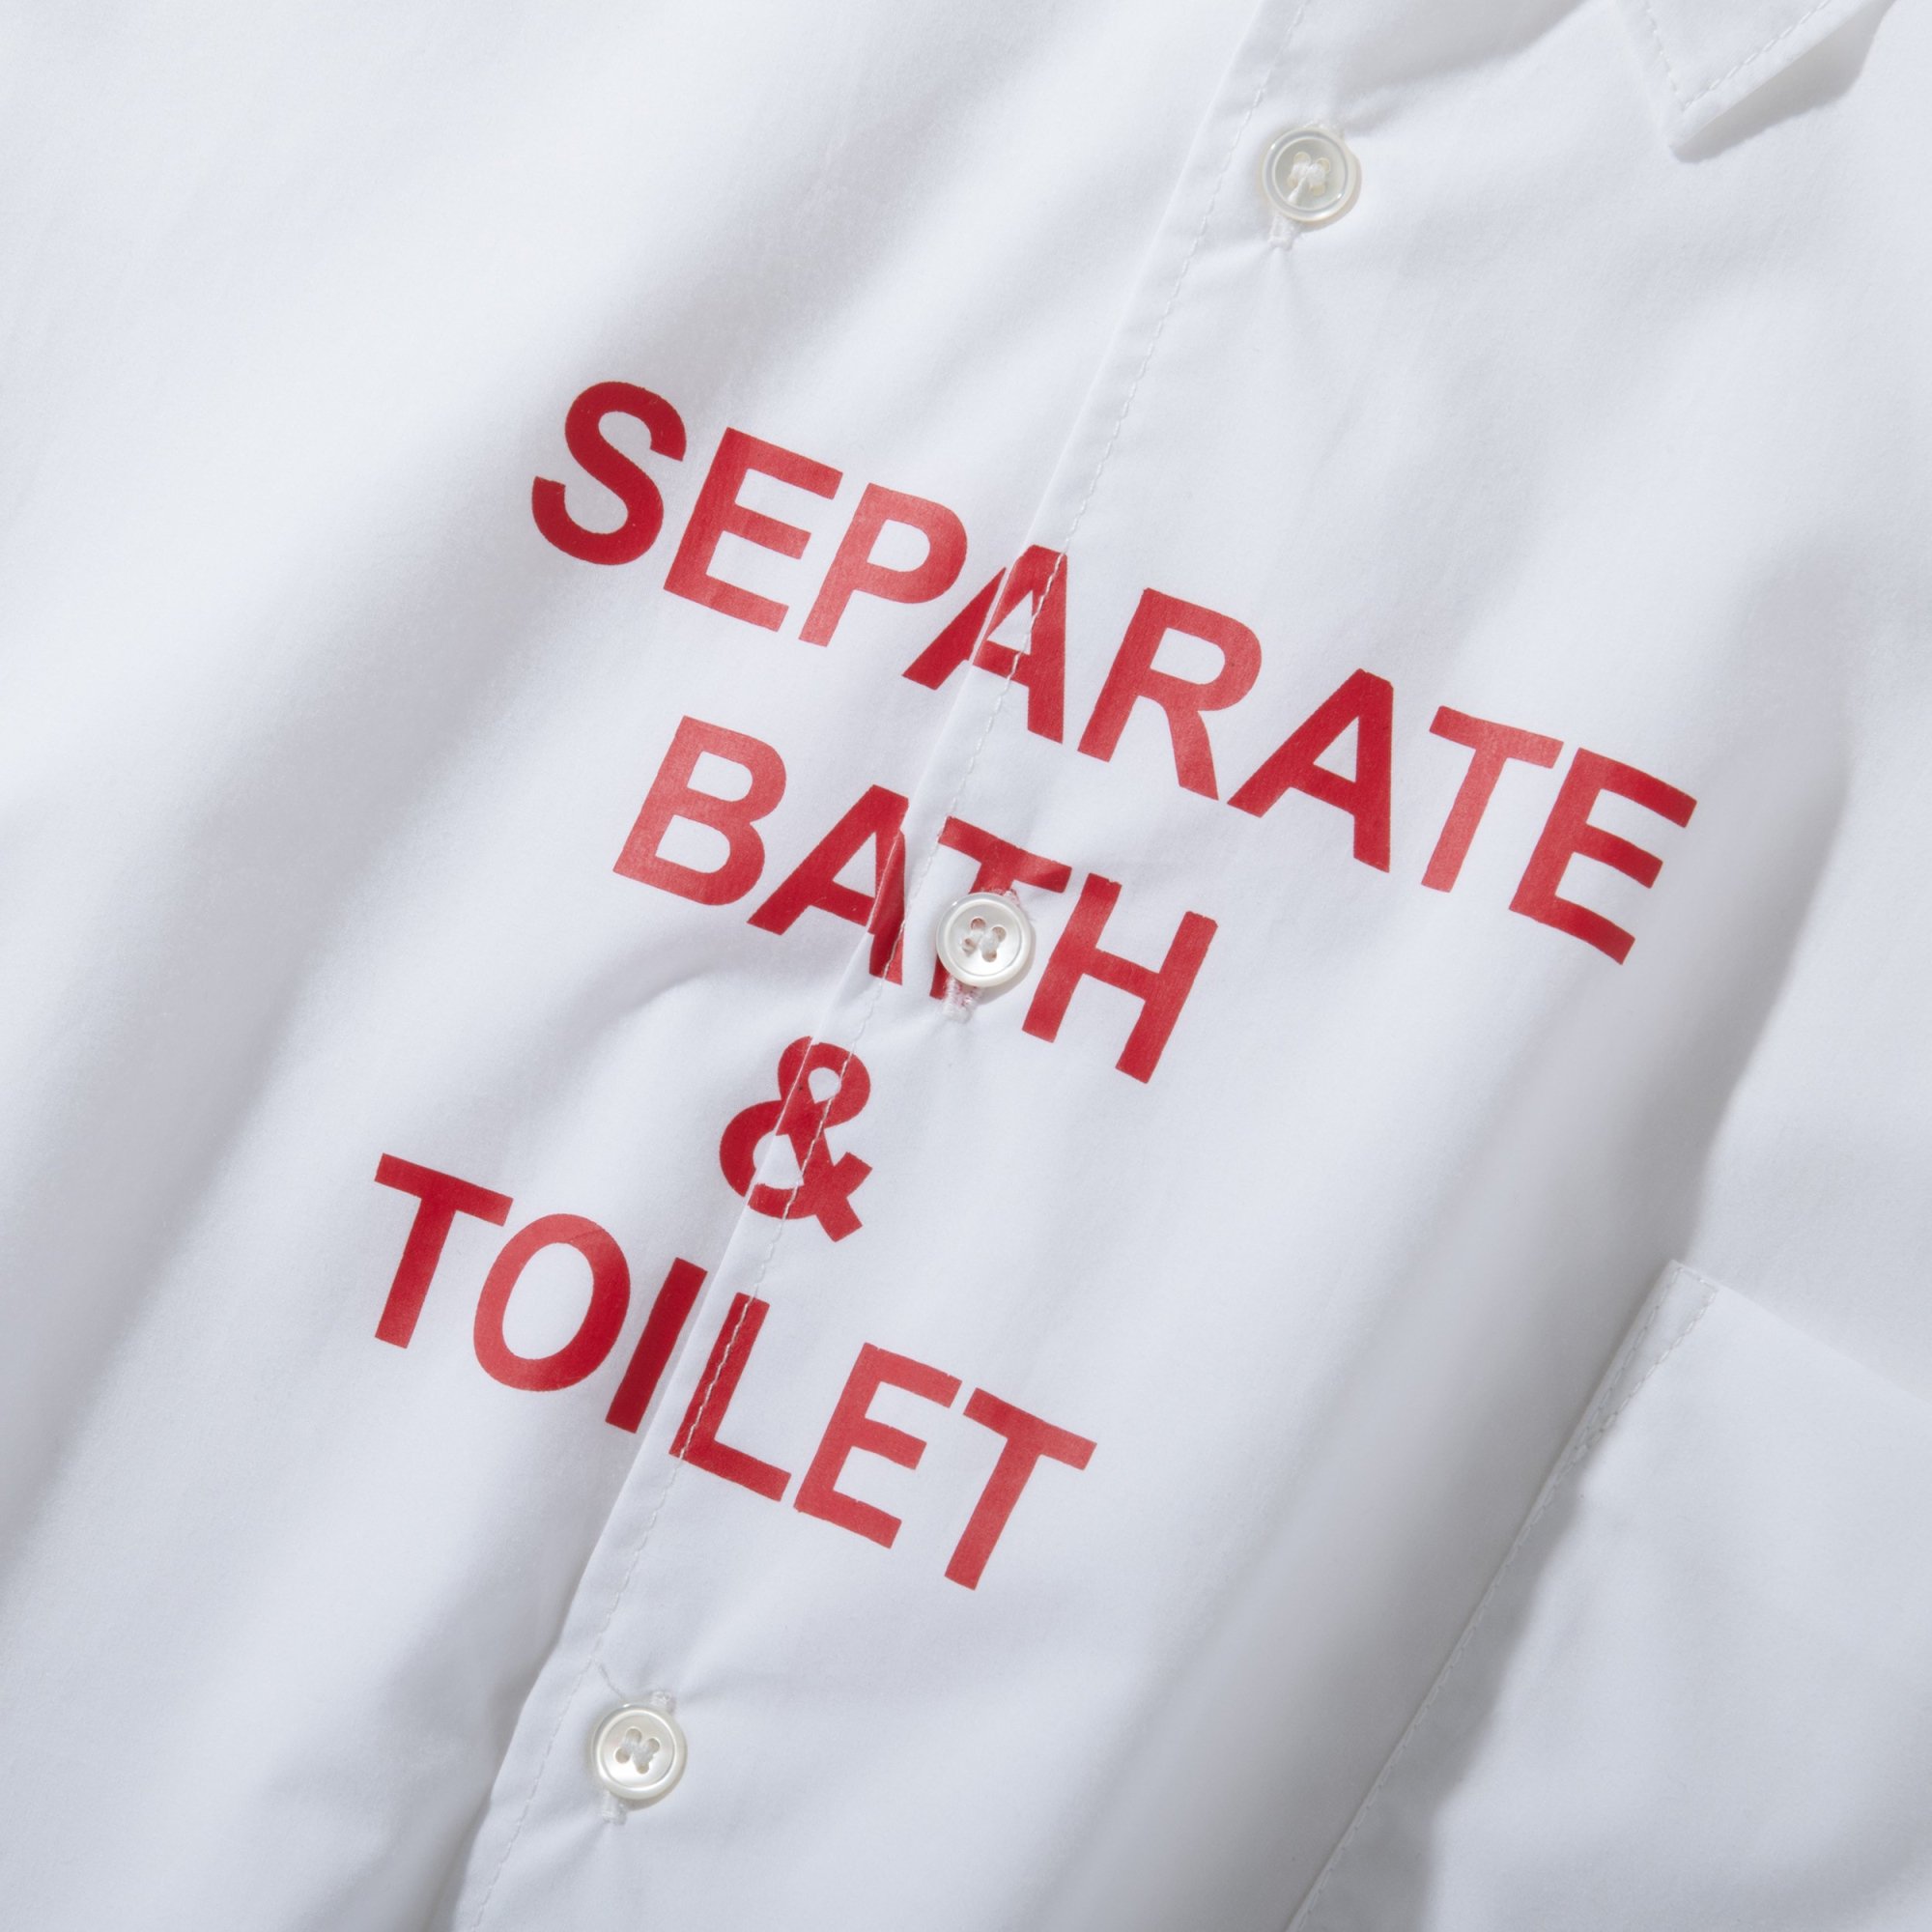 SEPARATE BATH & TOILET<br />SEPASHIRTS AKA / WHITE<img class='new_mark_img2' src='https://img.shop-pro.jp/img/new/icons14.gif' style='border:none;display:inline;margin:0px;padding:0px;width:auto;' />